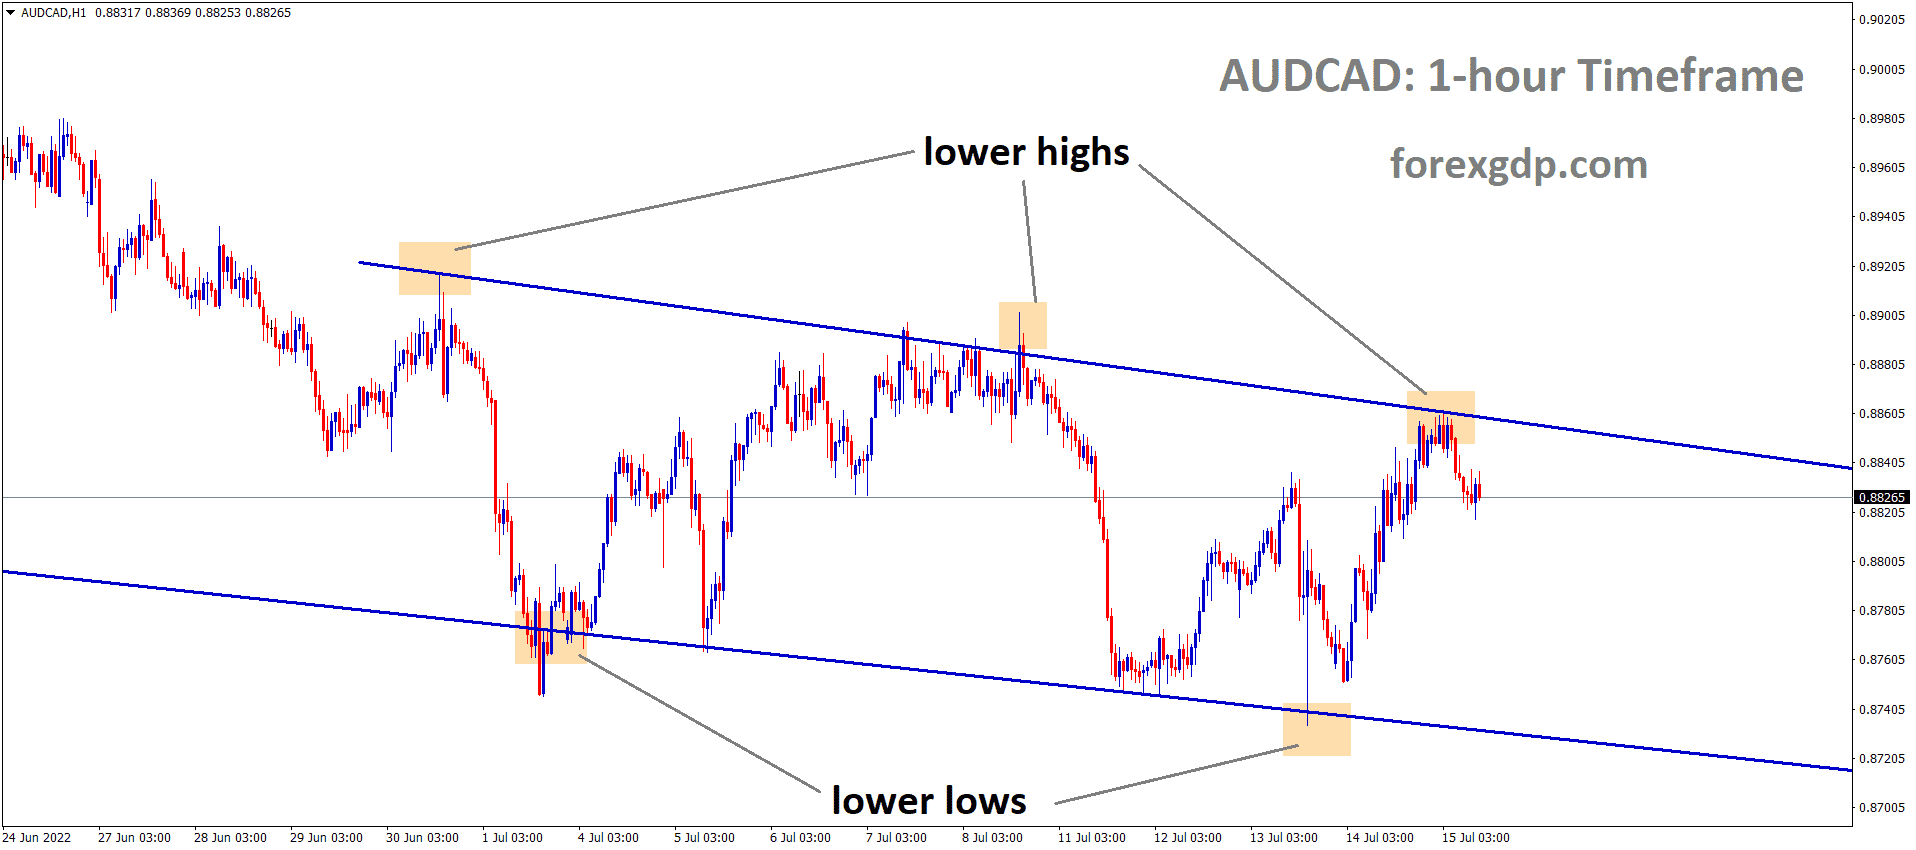 AUDCAD is moving in the Descending channel and the Market has fallen from the Lower high area of the channel